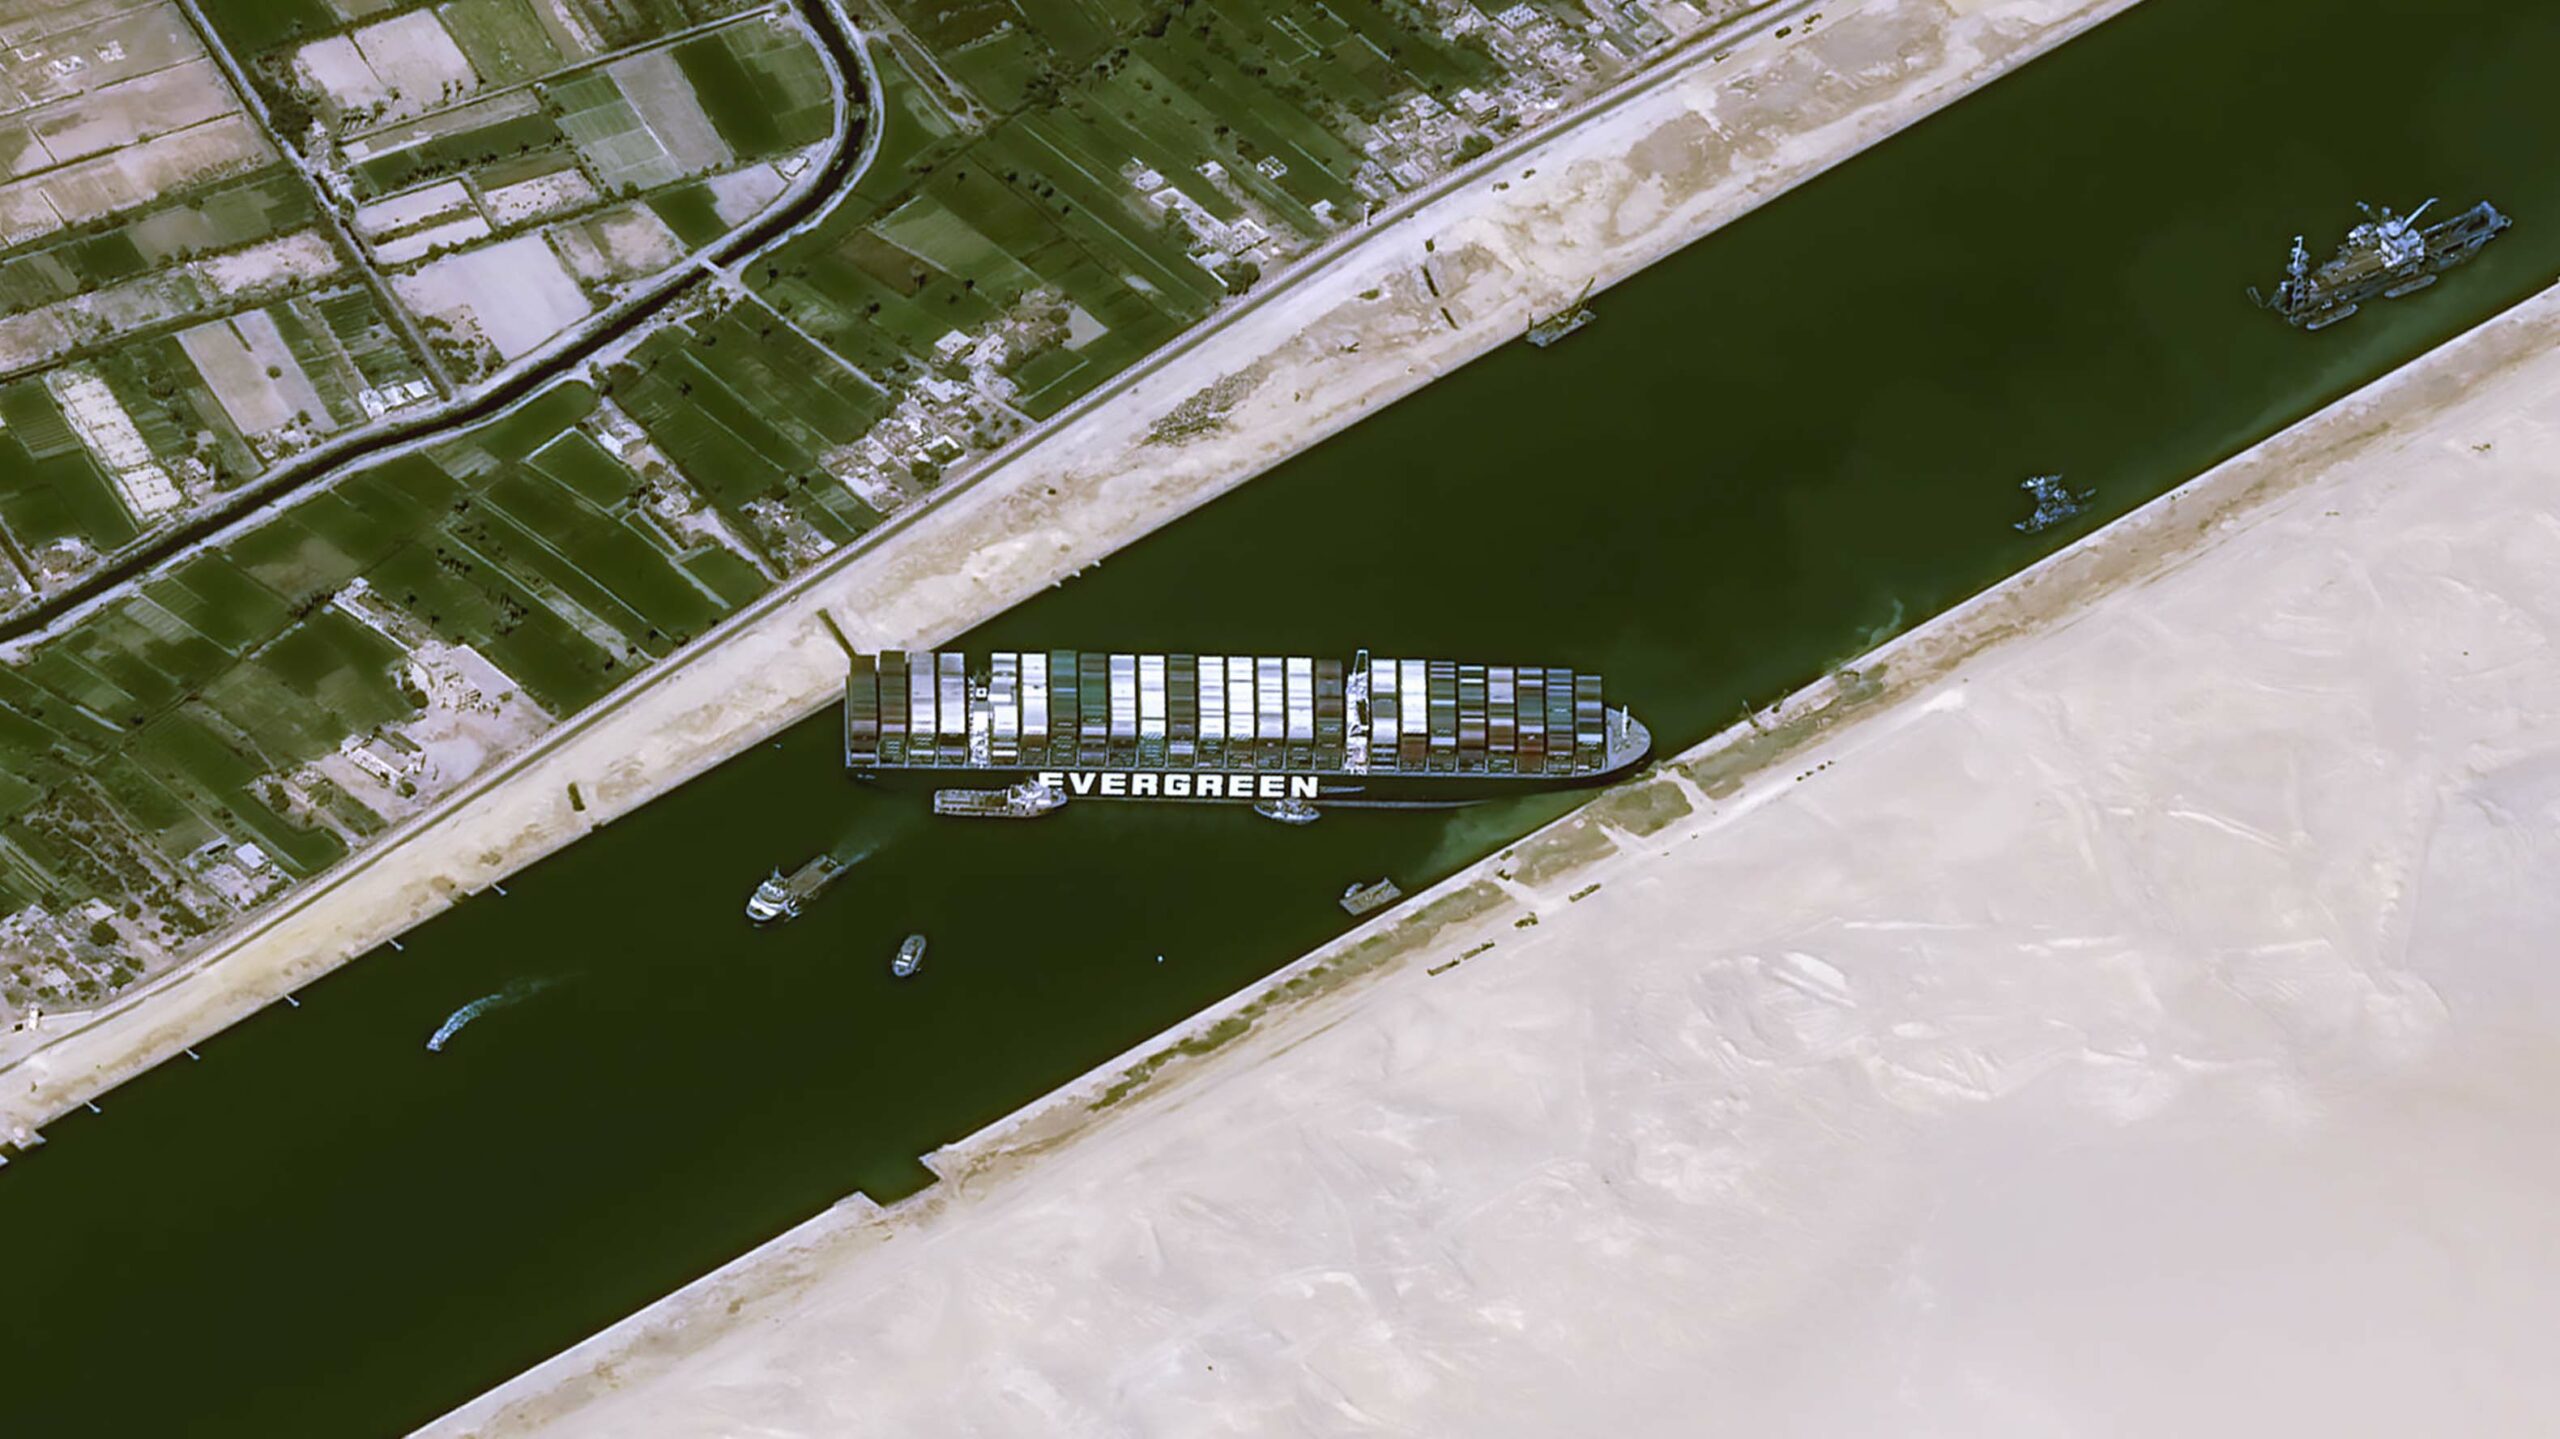 Want to track that big boat stuck in the Suez Canal? Here's how - TheLiveFeeds.com